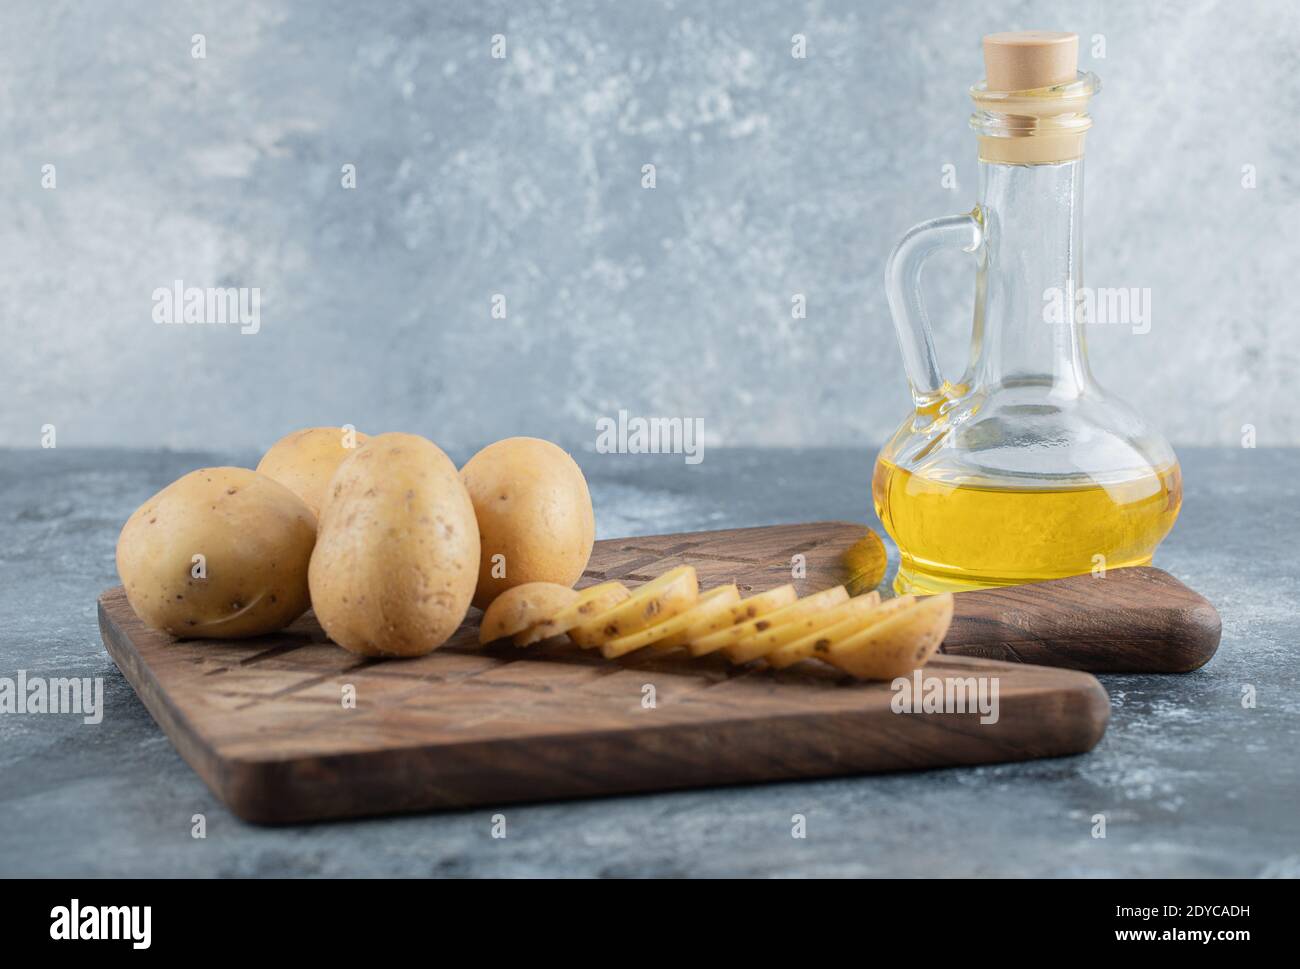 Sliced and whole potatoes on the wooden cutting board Stock Photo